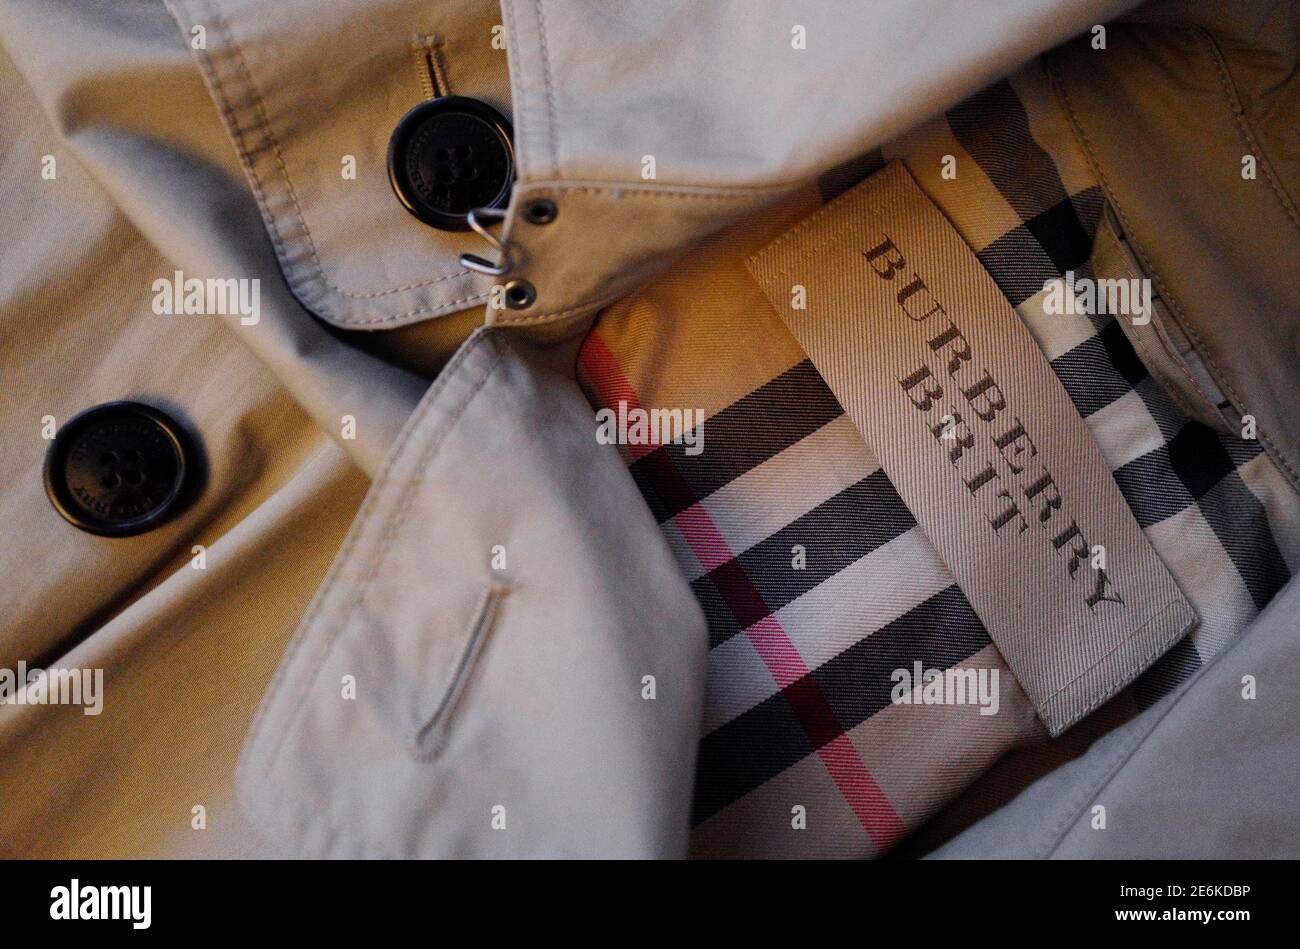 A close up picture shows the label of British fashion design house Burberry  inside a Burberry